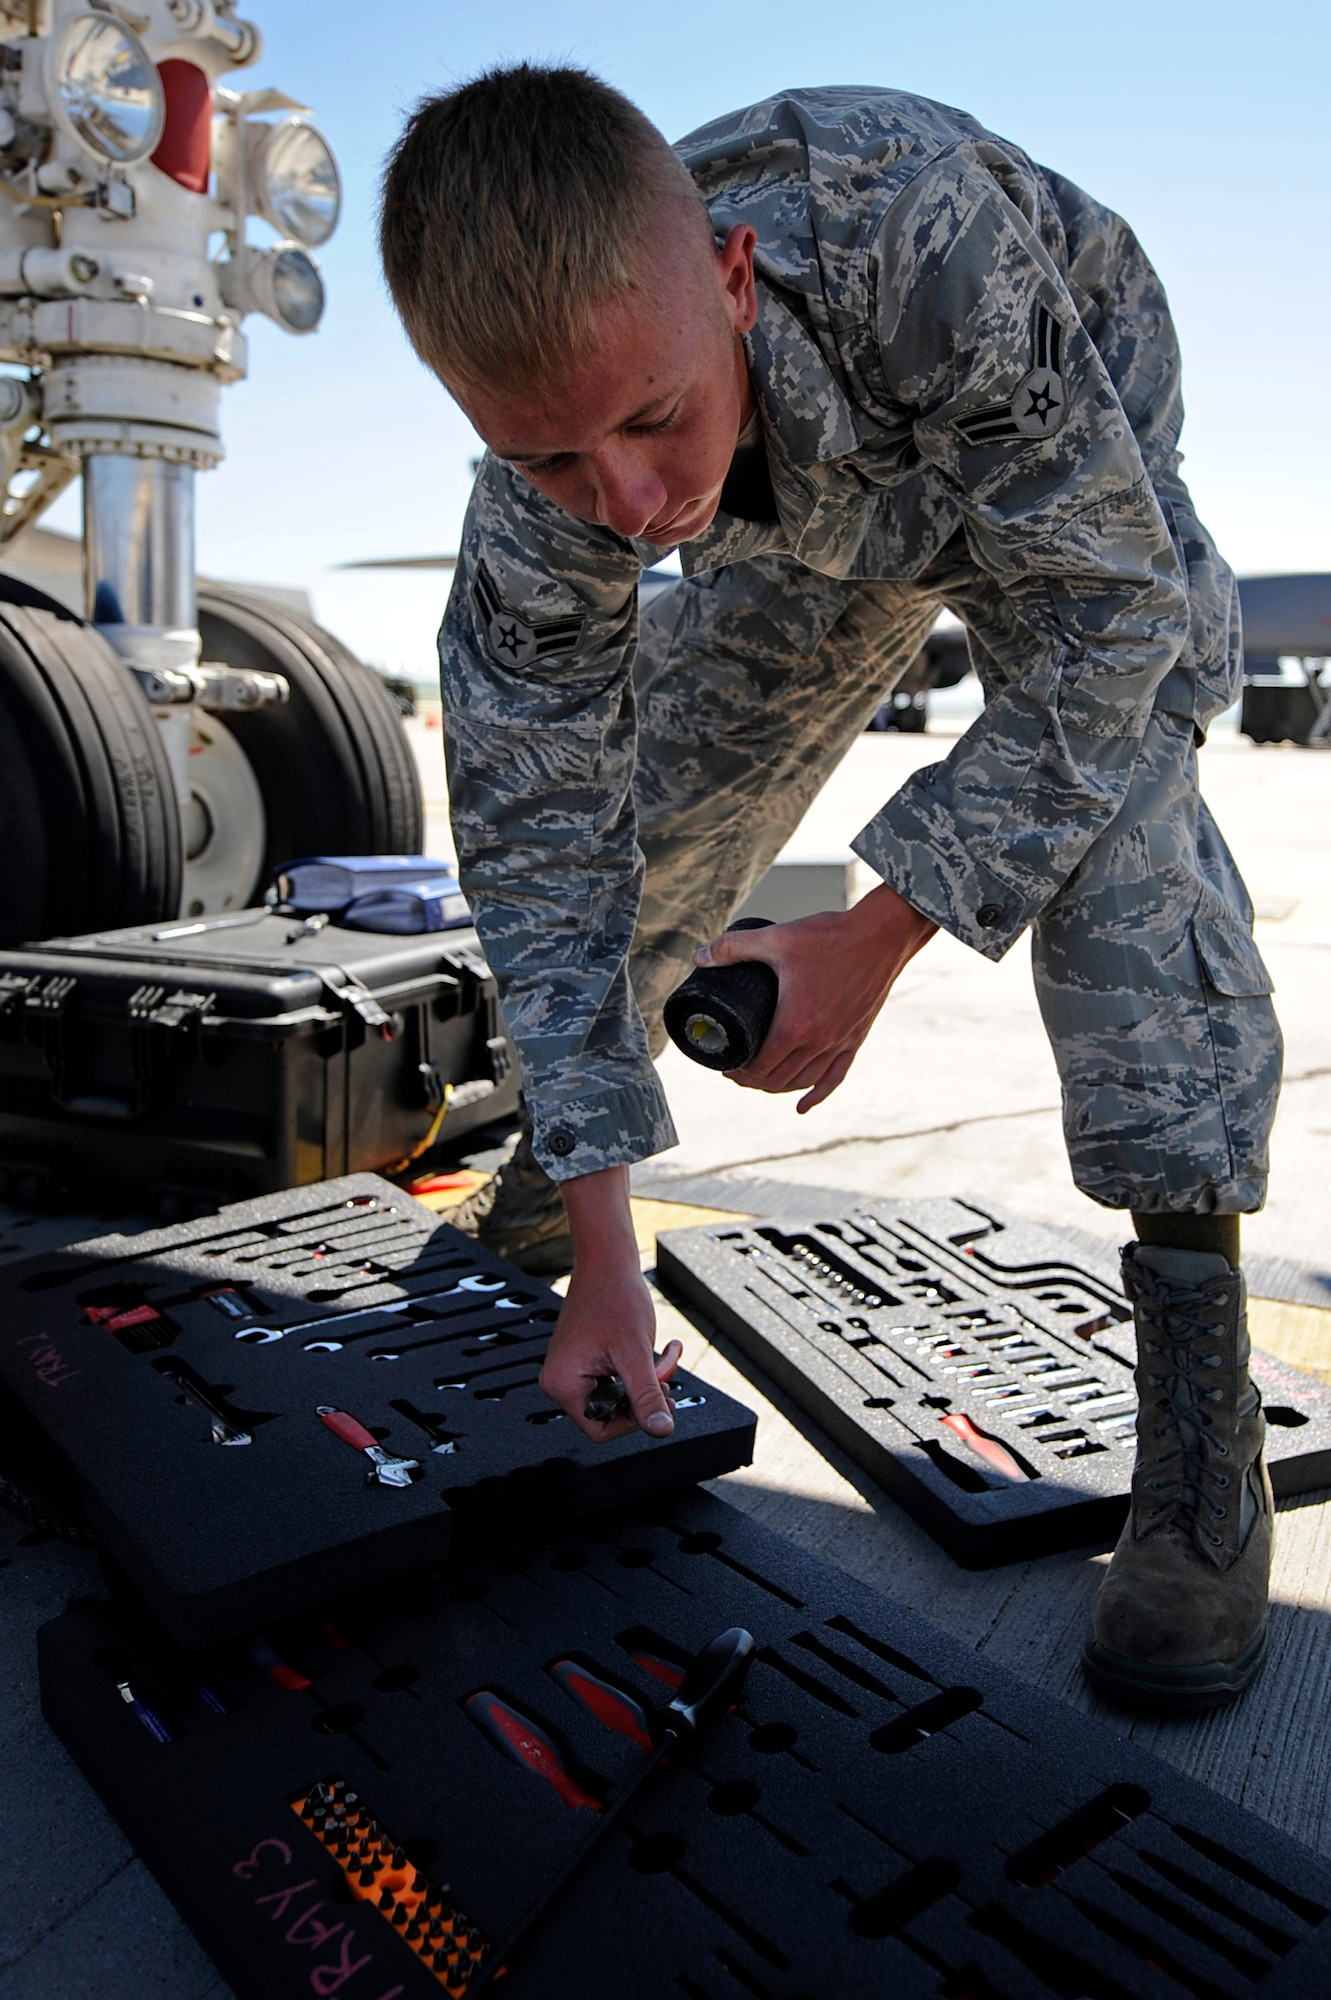 ELLSWORTH AIR FORCE BASE, S.D. – Airman 1st Class Darrick Coxson, 28th Aircraft Maintenance Squadron offensive avionics technician, performs a tool inventory and foreign object debris check, June 30. Airman Coxson performs the check to ensure safety for the aircraft on the flightline. (U.S. Air Force photo/Airman 1st Class Matthew Flynn)